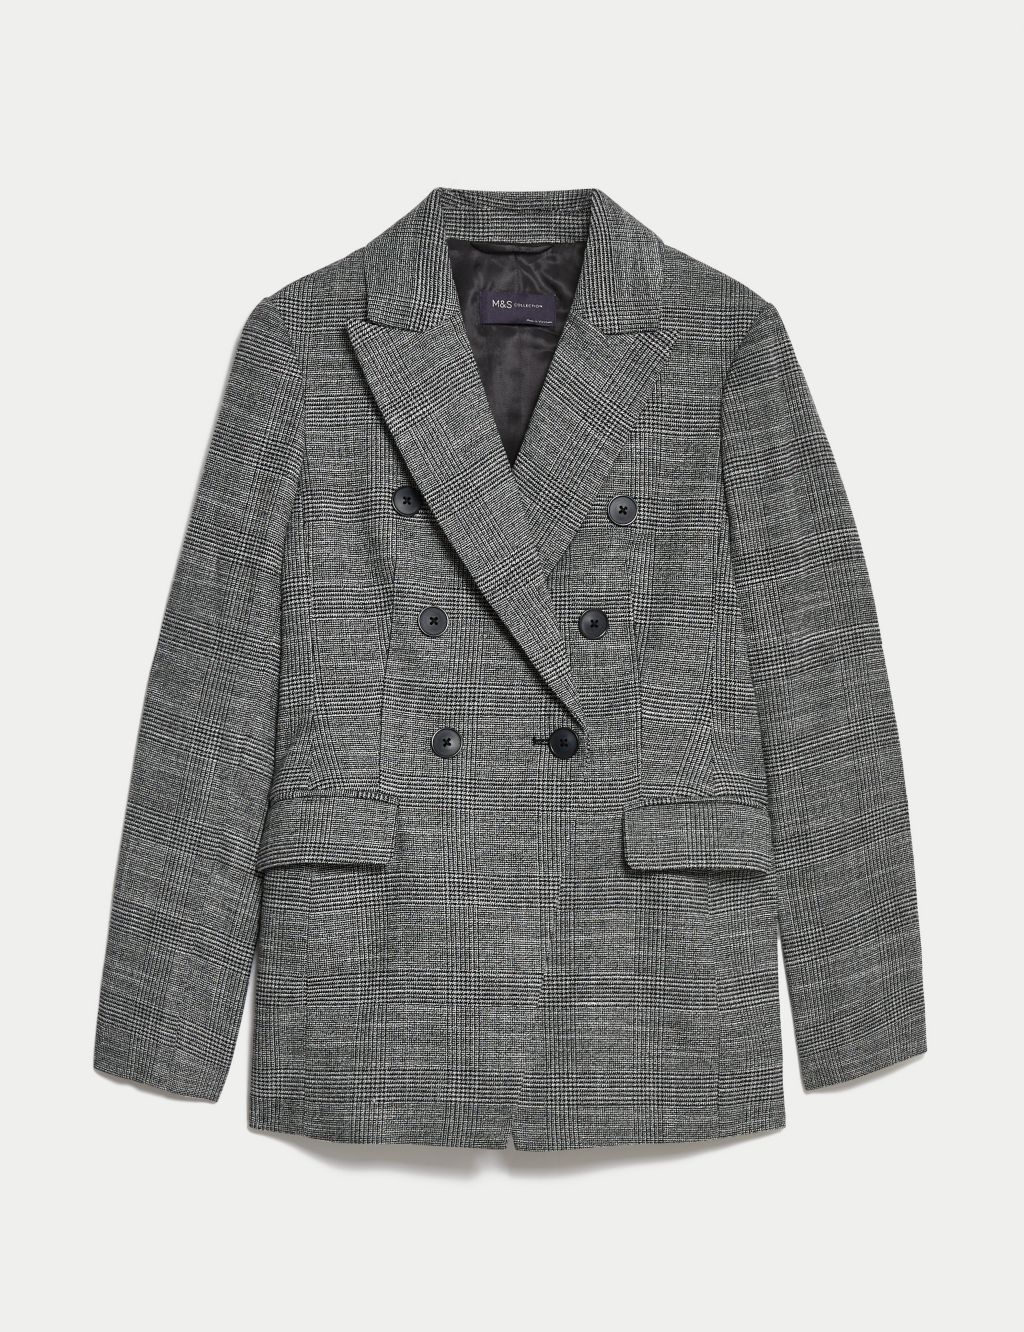 Tailored Checked Double Breasted Blazer image 2